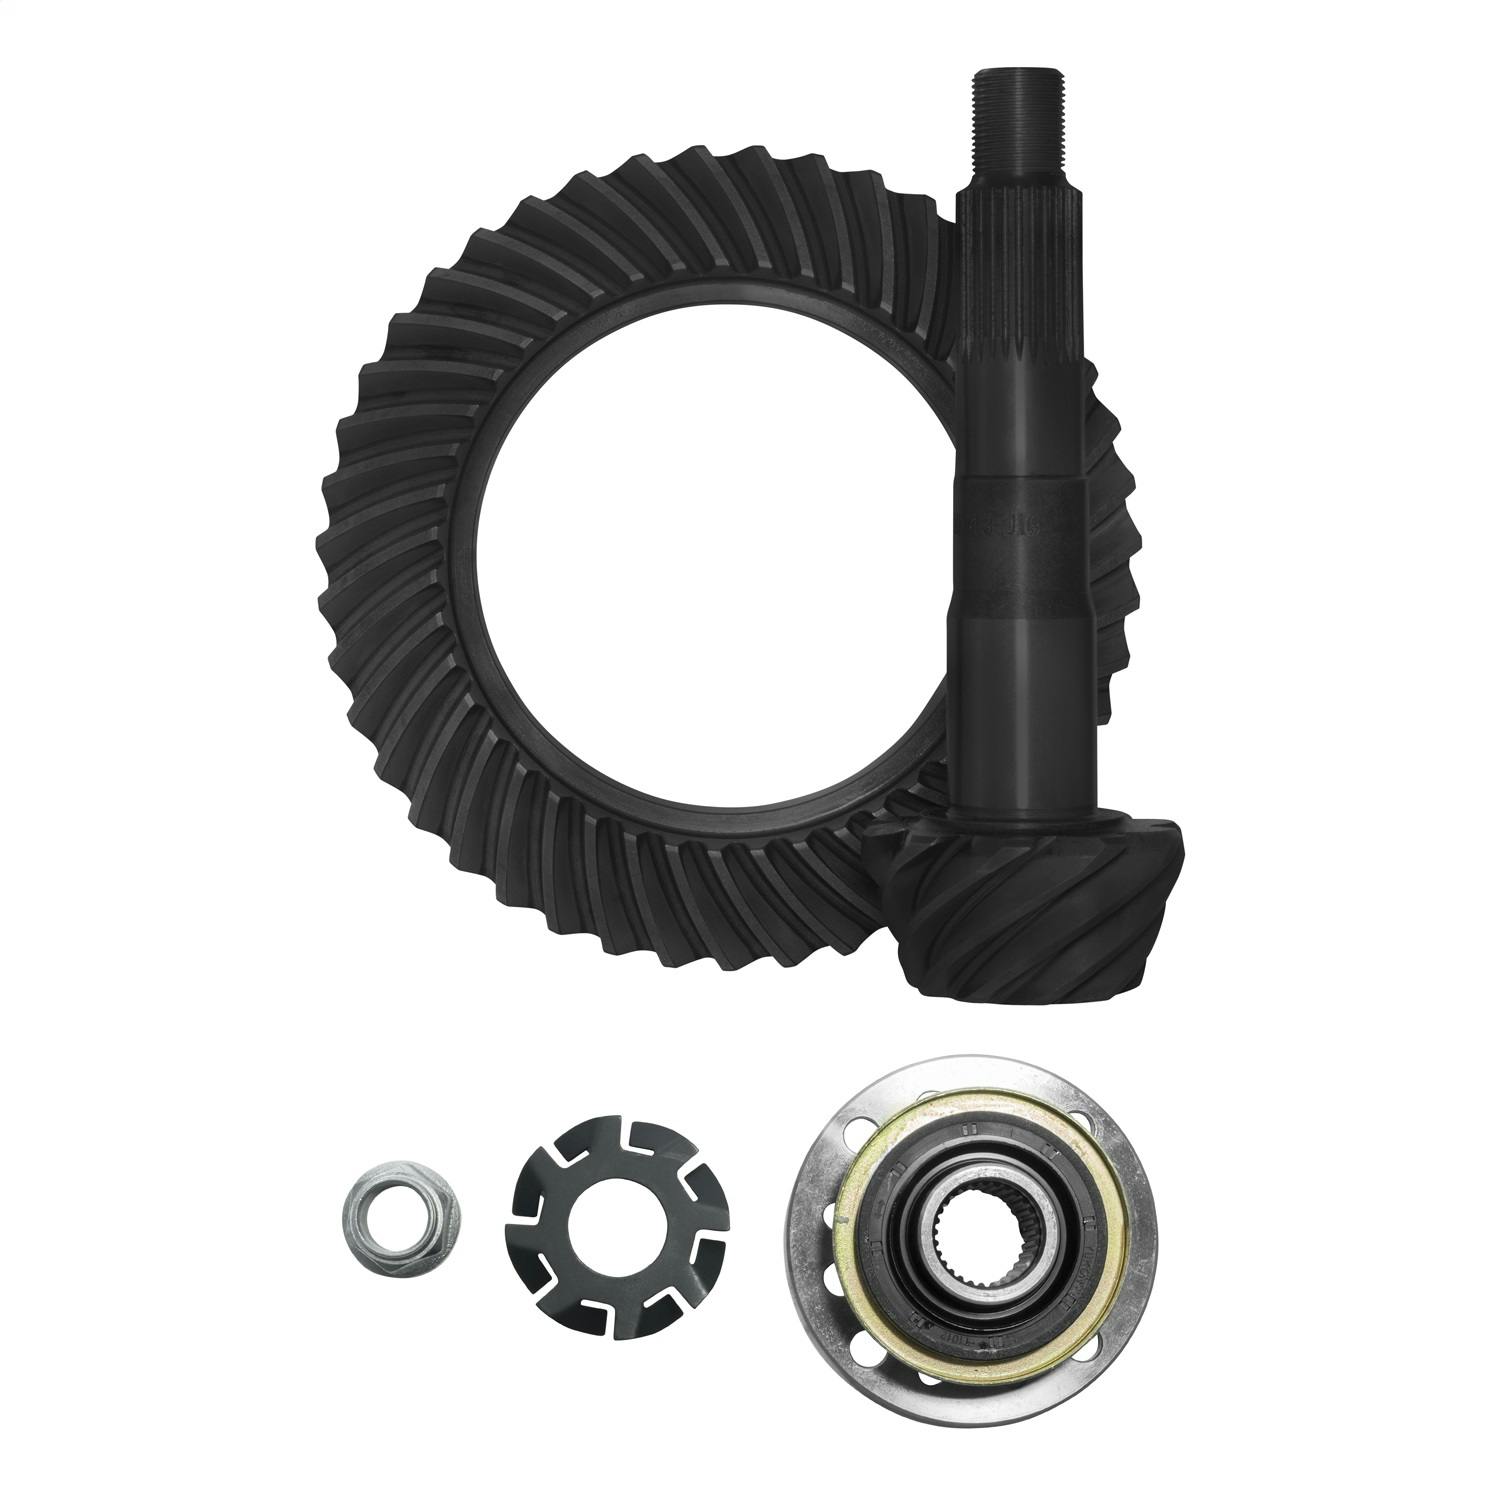 USA Standard Gear ZG TLCF-456RK Differential Ring and Pinion